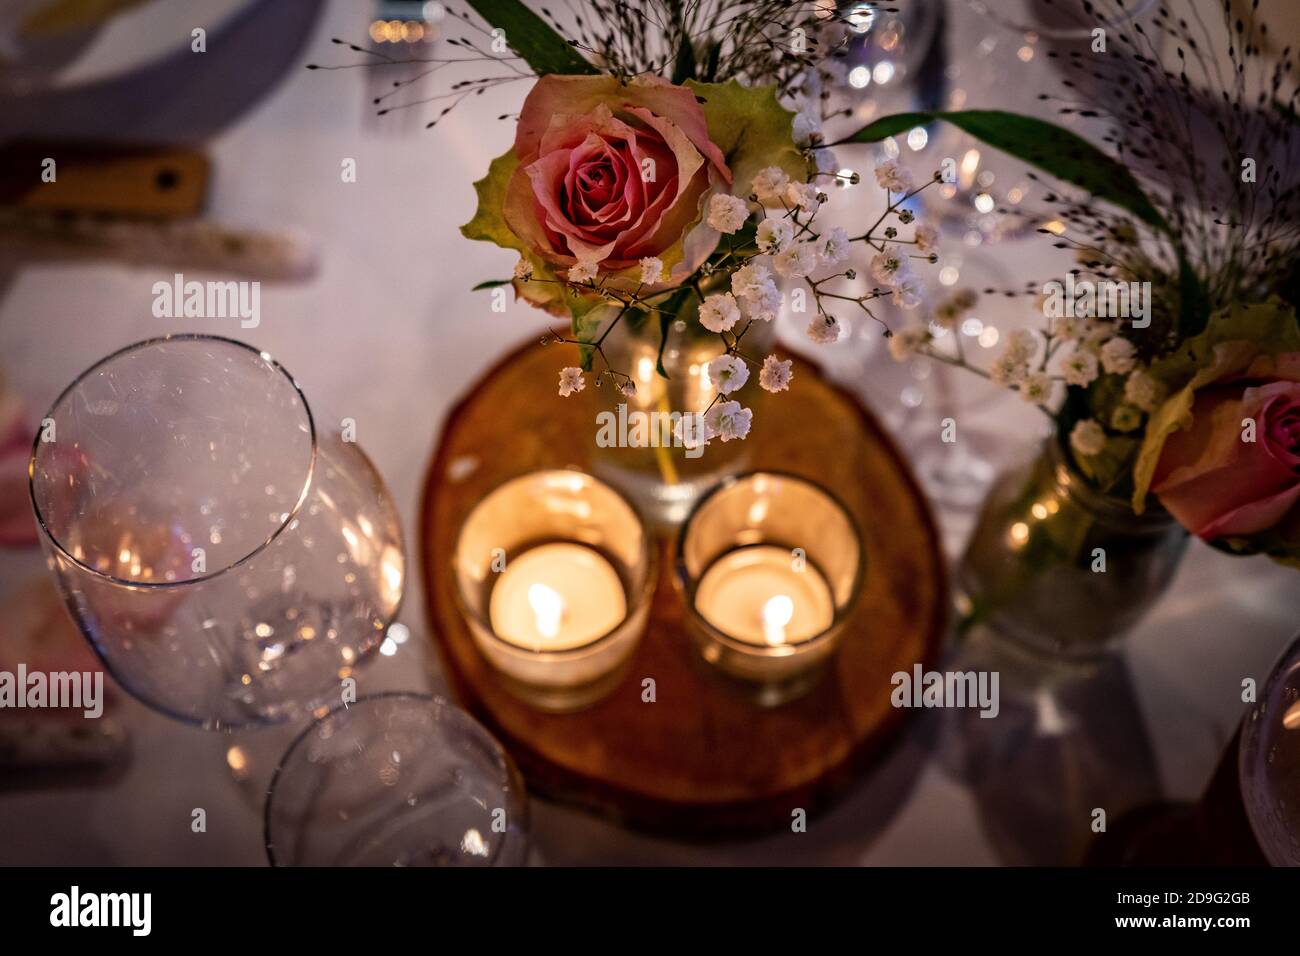 candlelight dinner table decoration Stock Photo